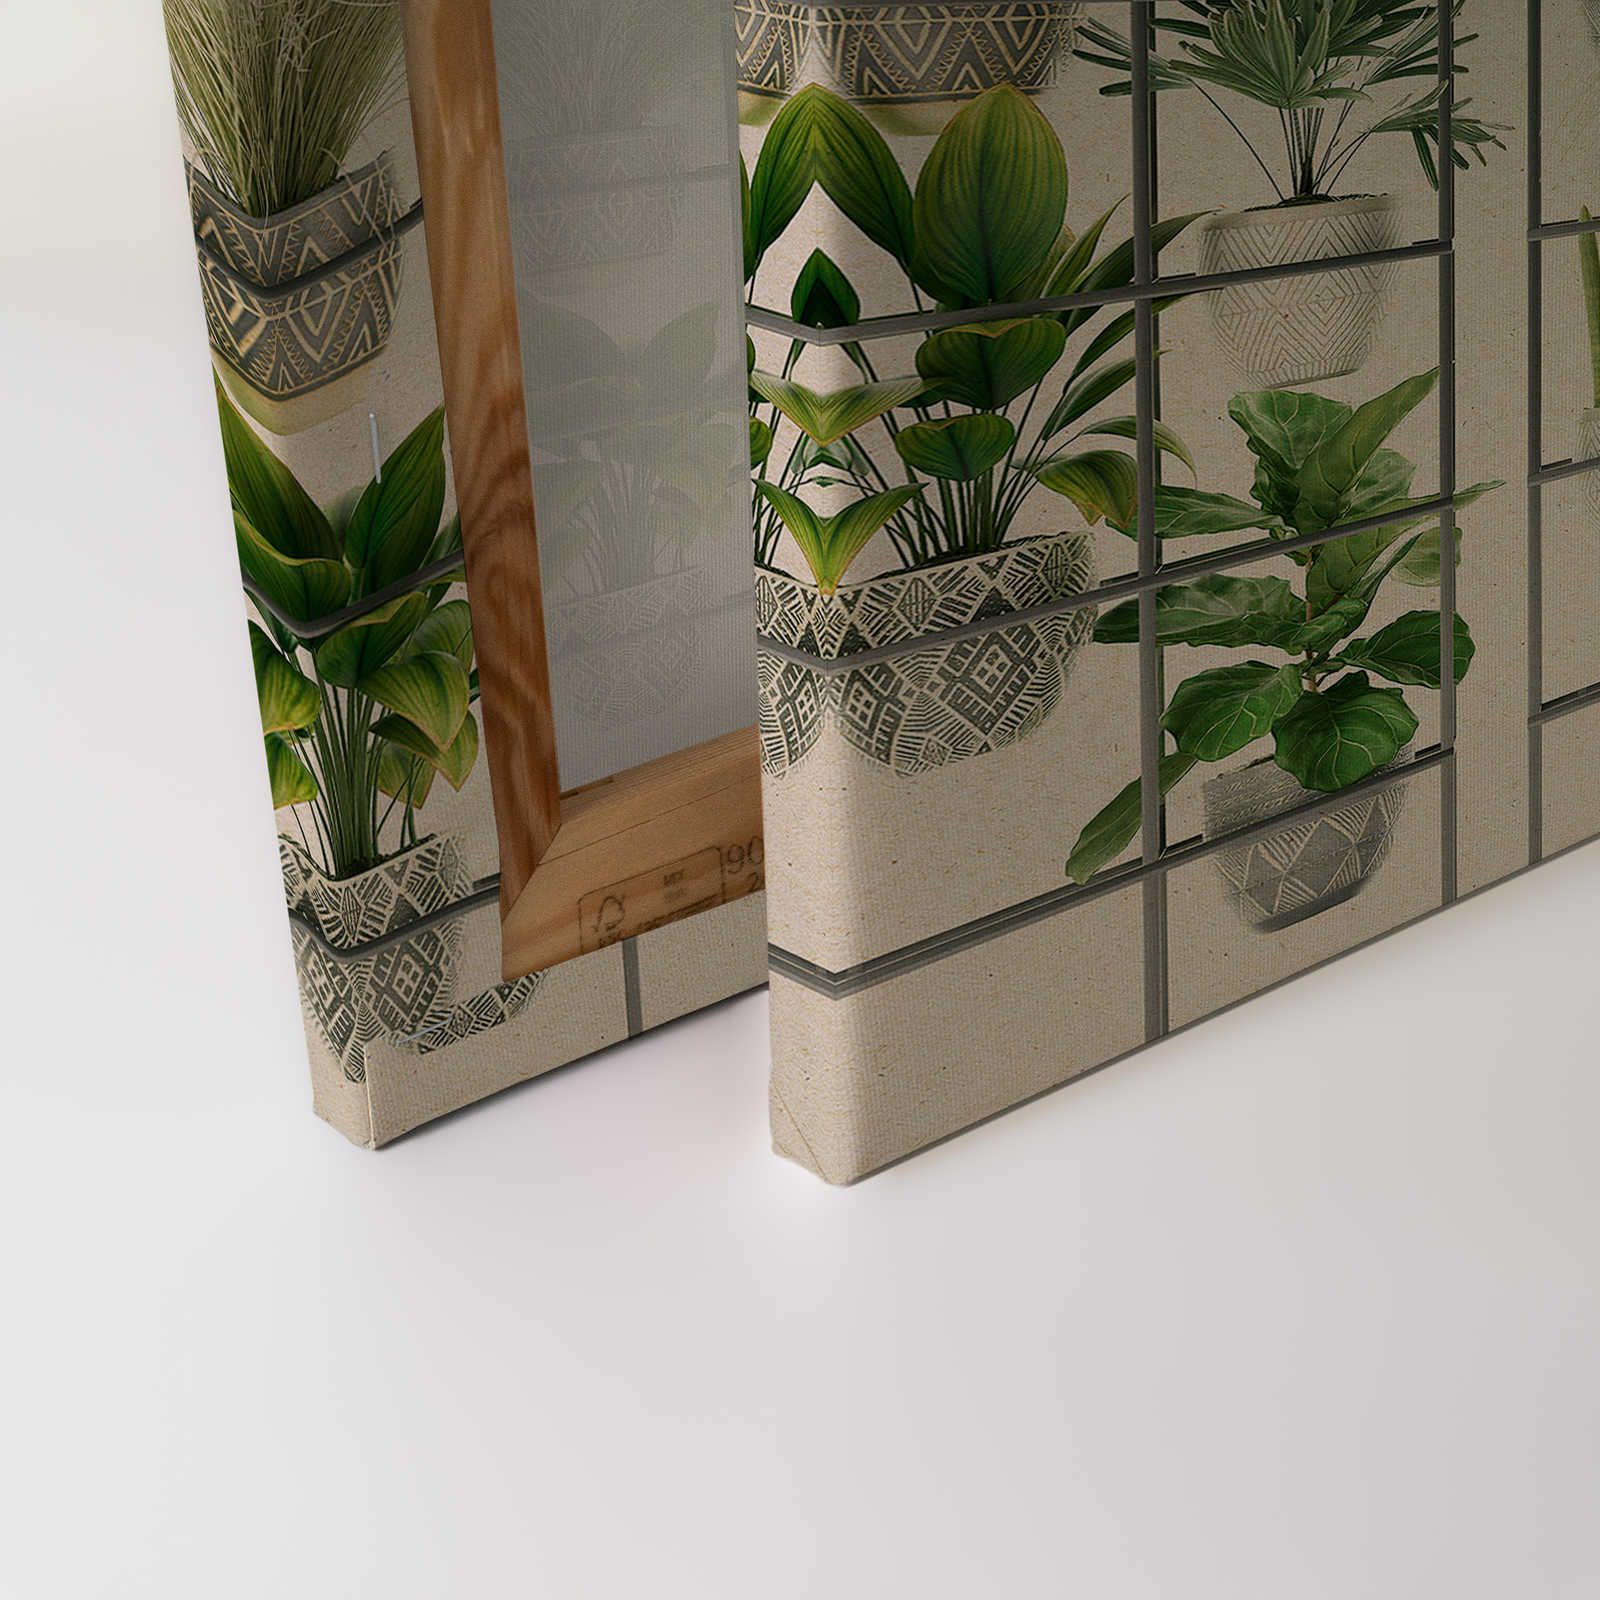             Plant Shop 2 - Canvas painting modern plant wall in green & grey - 0,90 m x 0,60 m
        